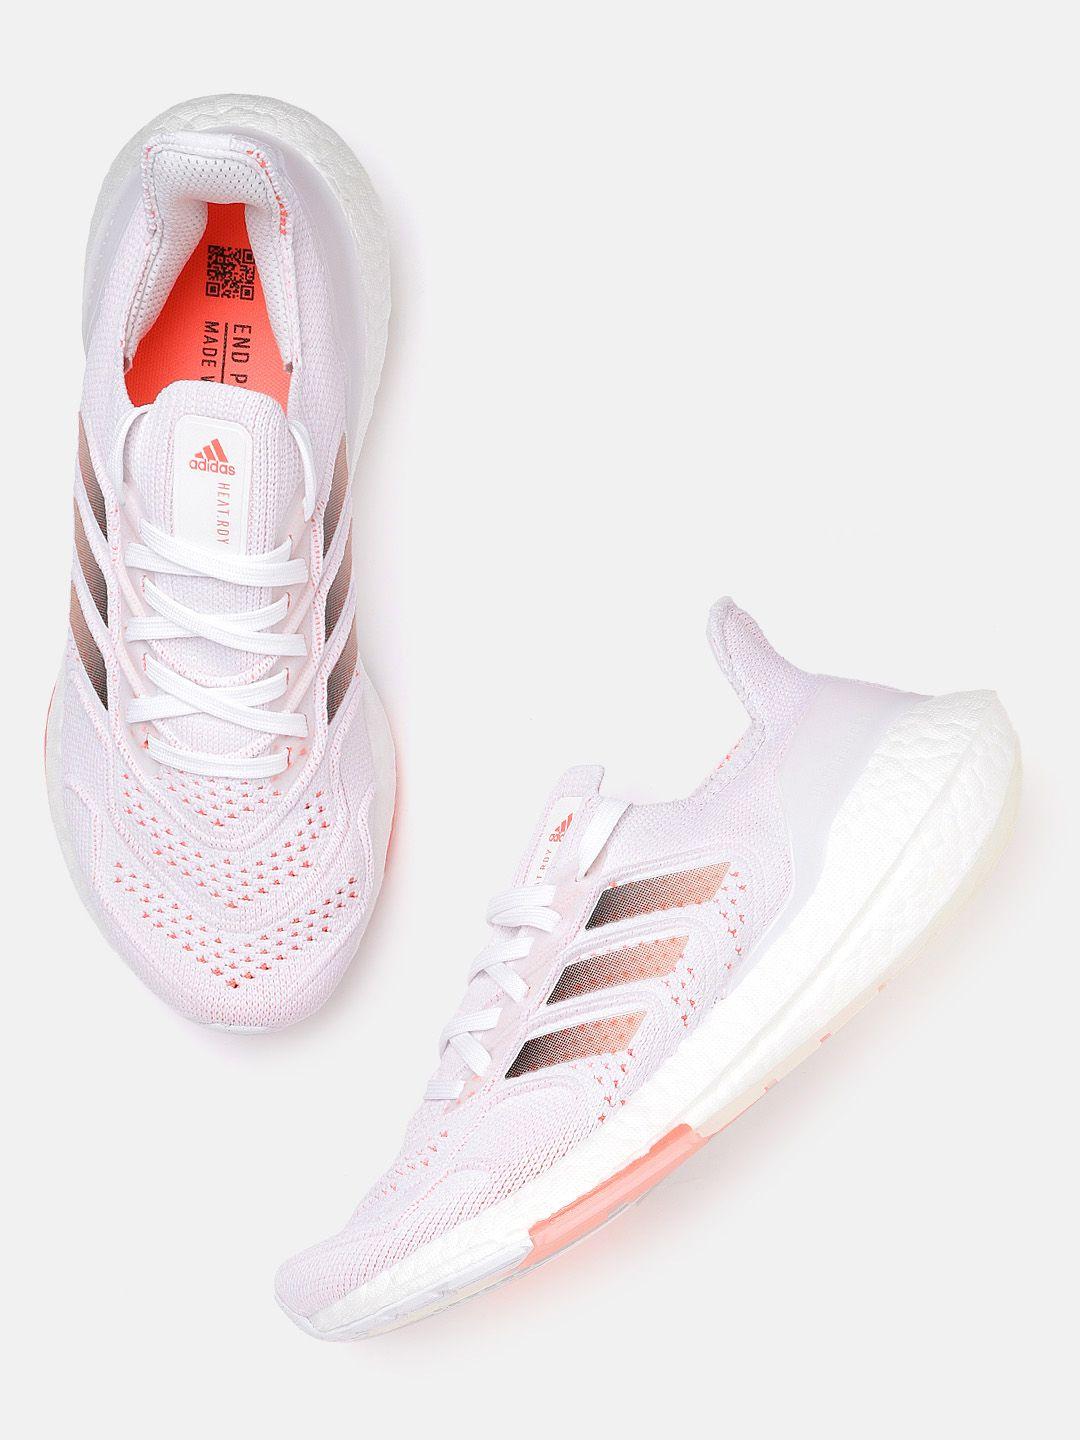 adidas-women-white-&-coral-pink-woven-design-ultraboost-22-heat.rdy-sustainable-running-shoes